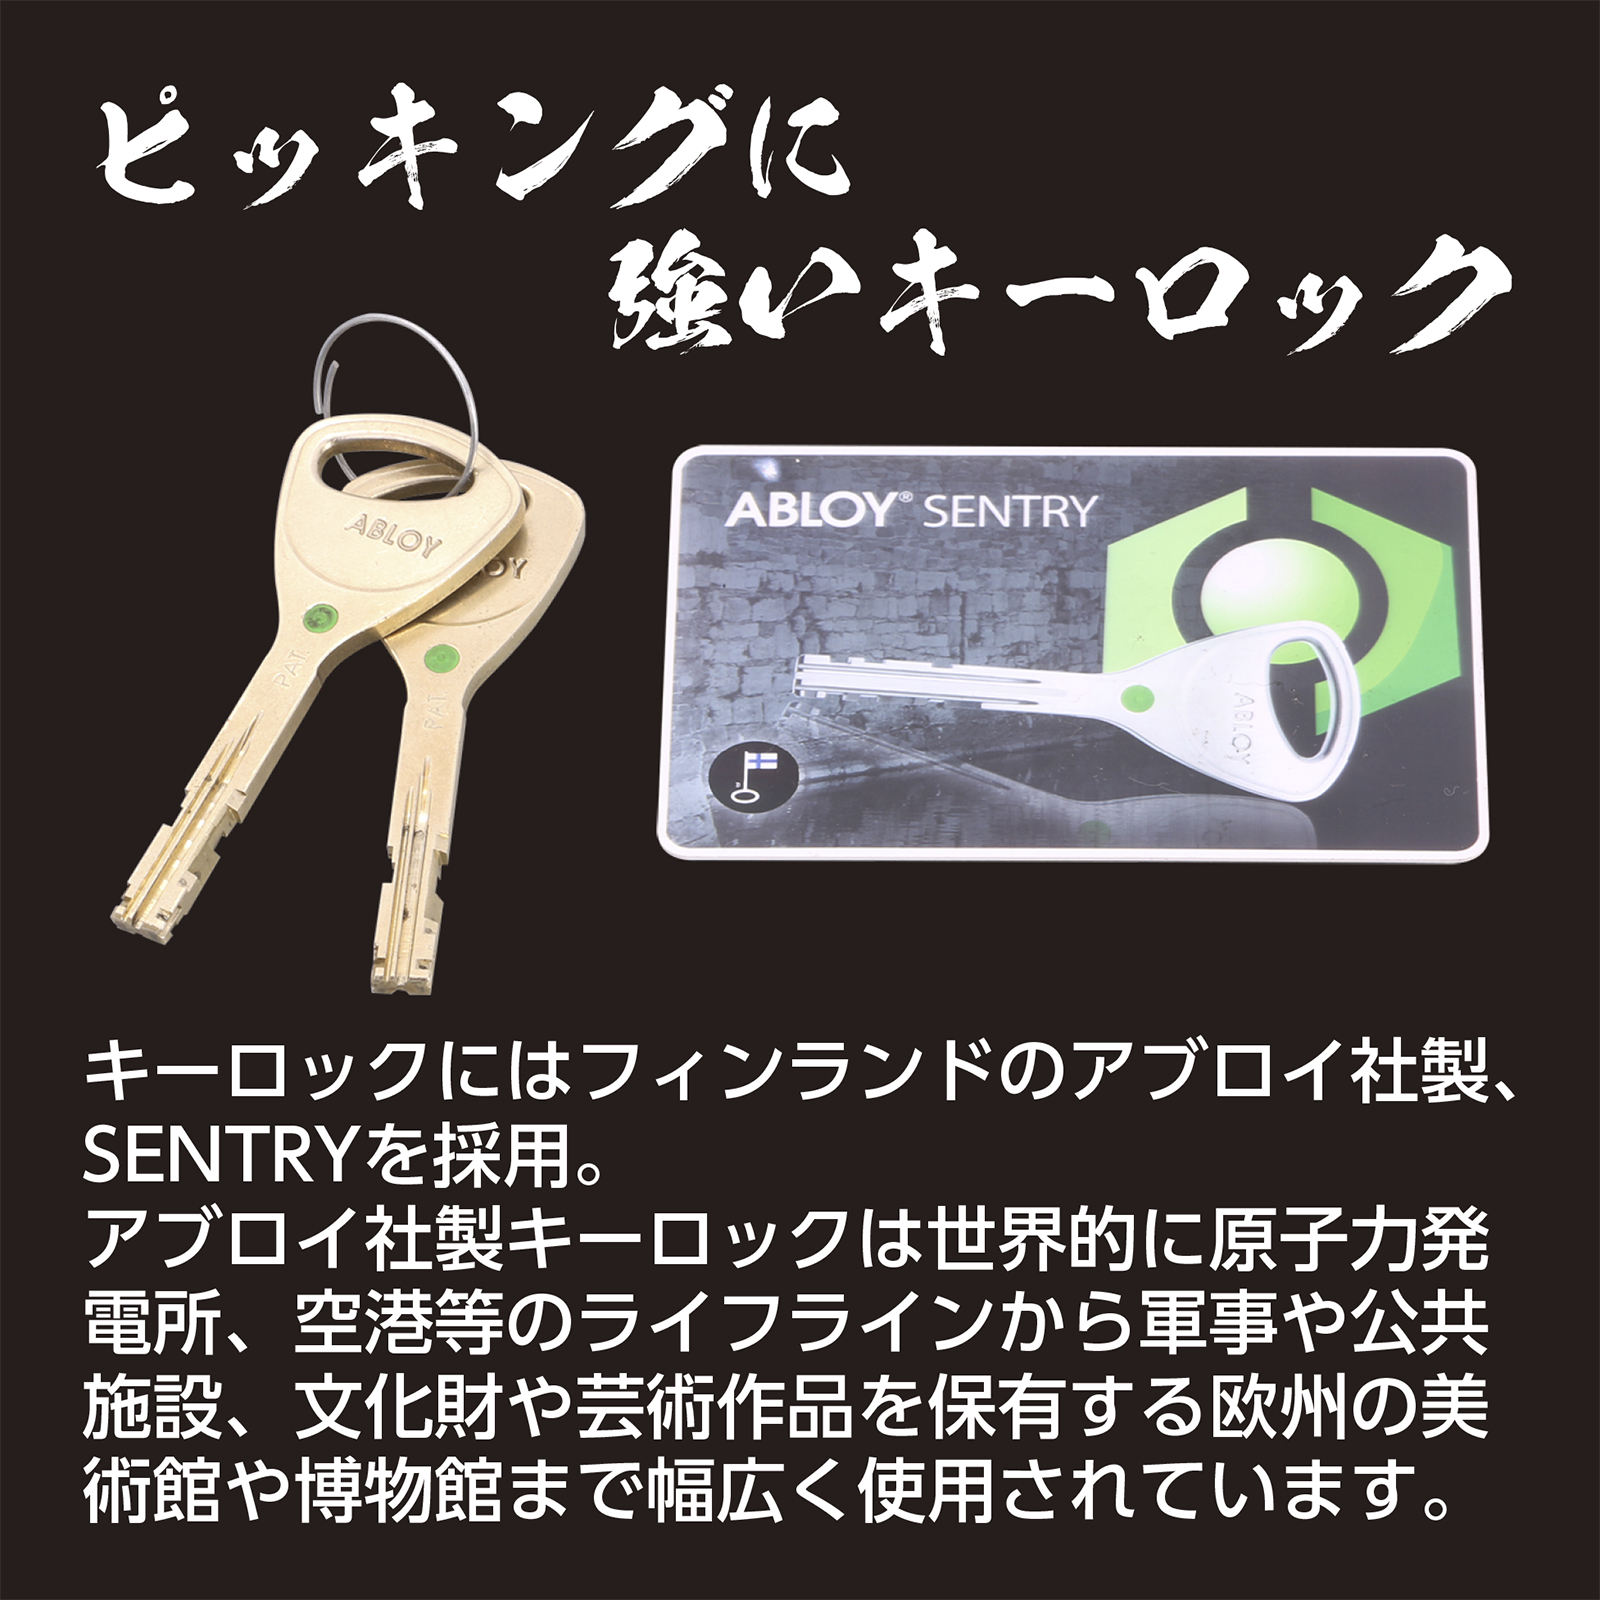 KITACO キタコ　ABLOY